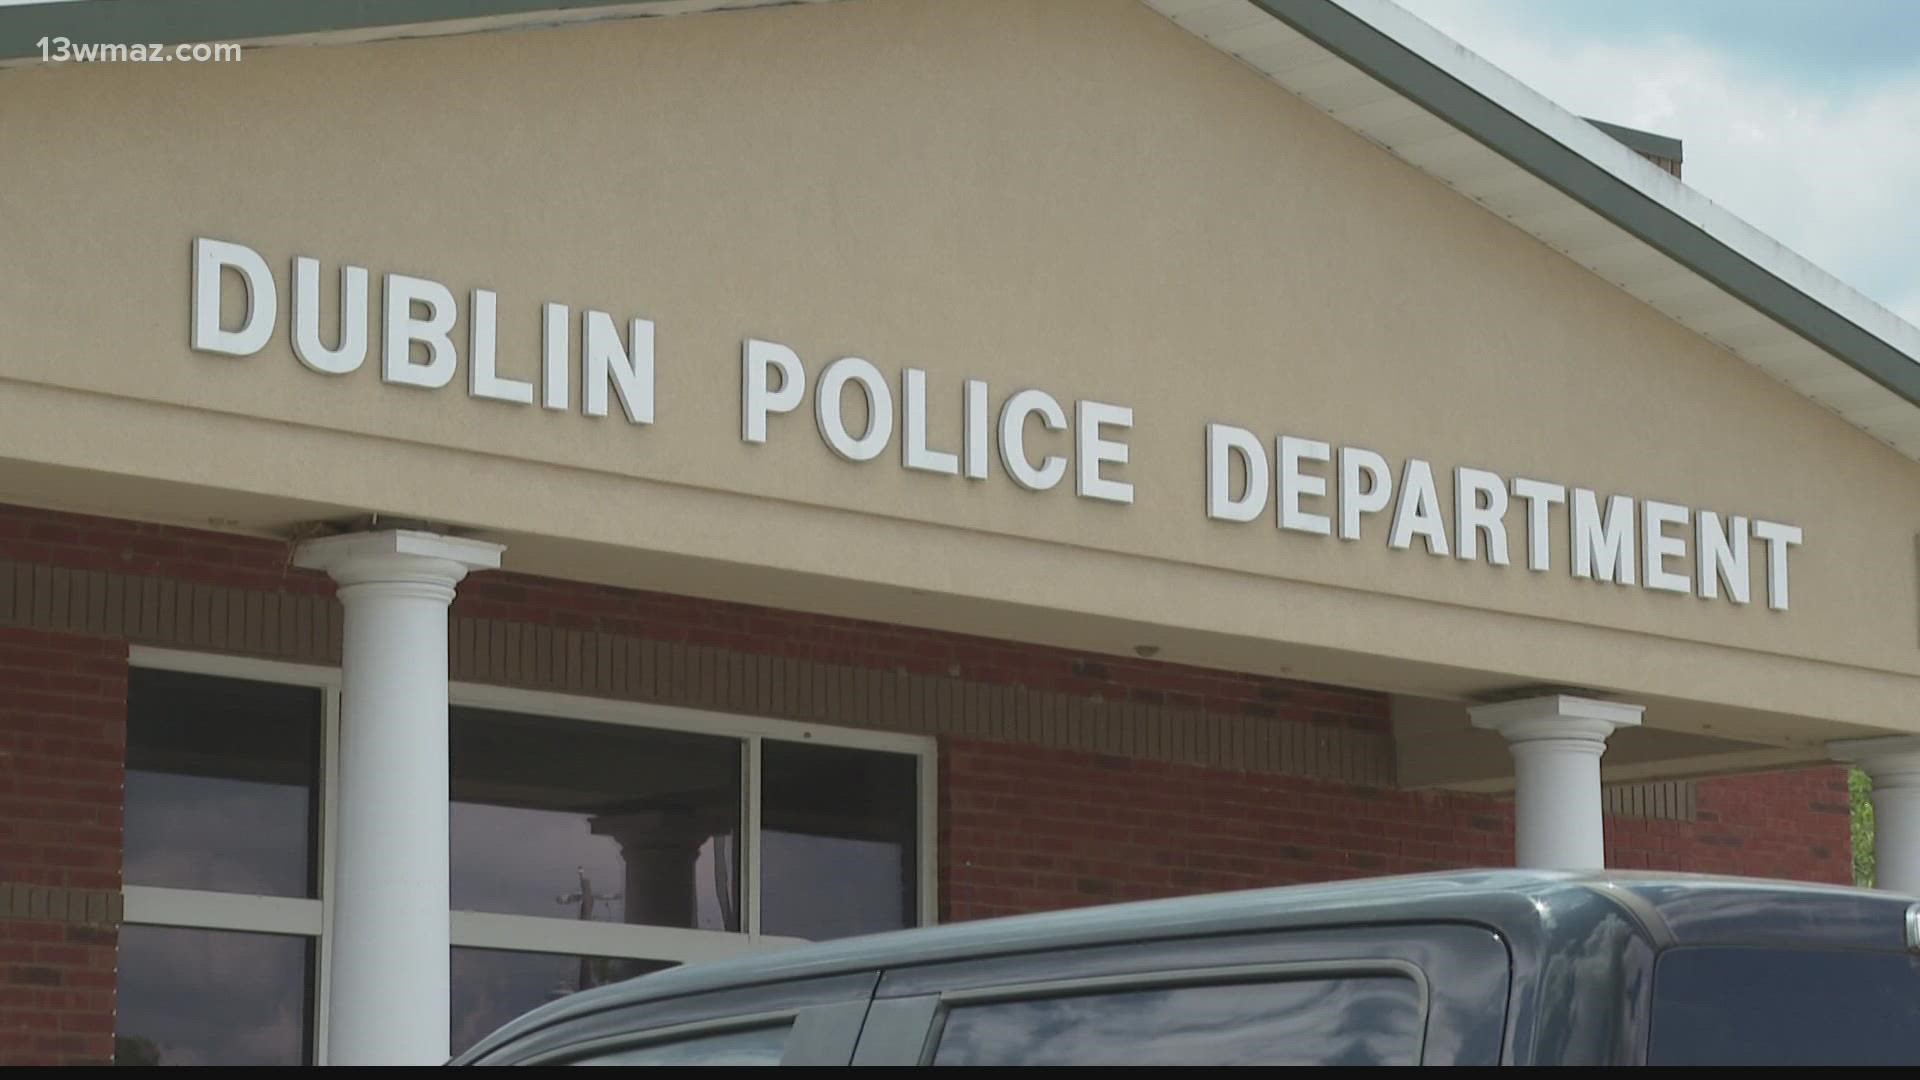 The city of Dublin is offering signing bonuses to officers based on experience level.